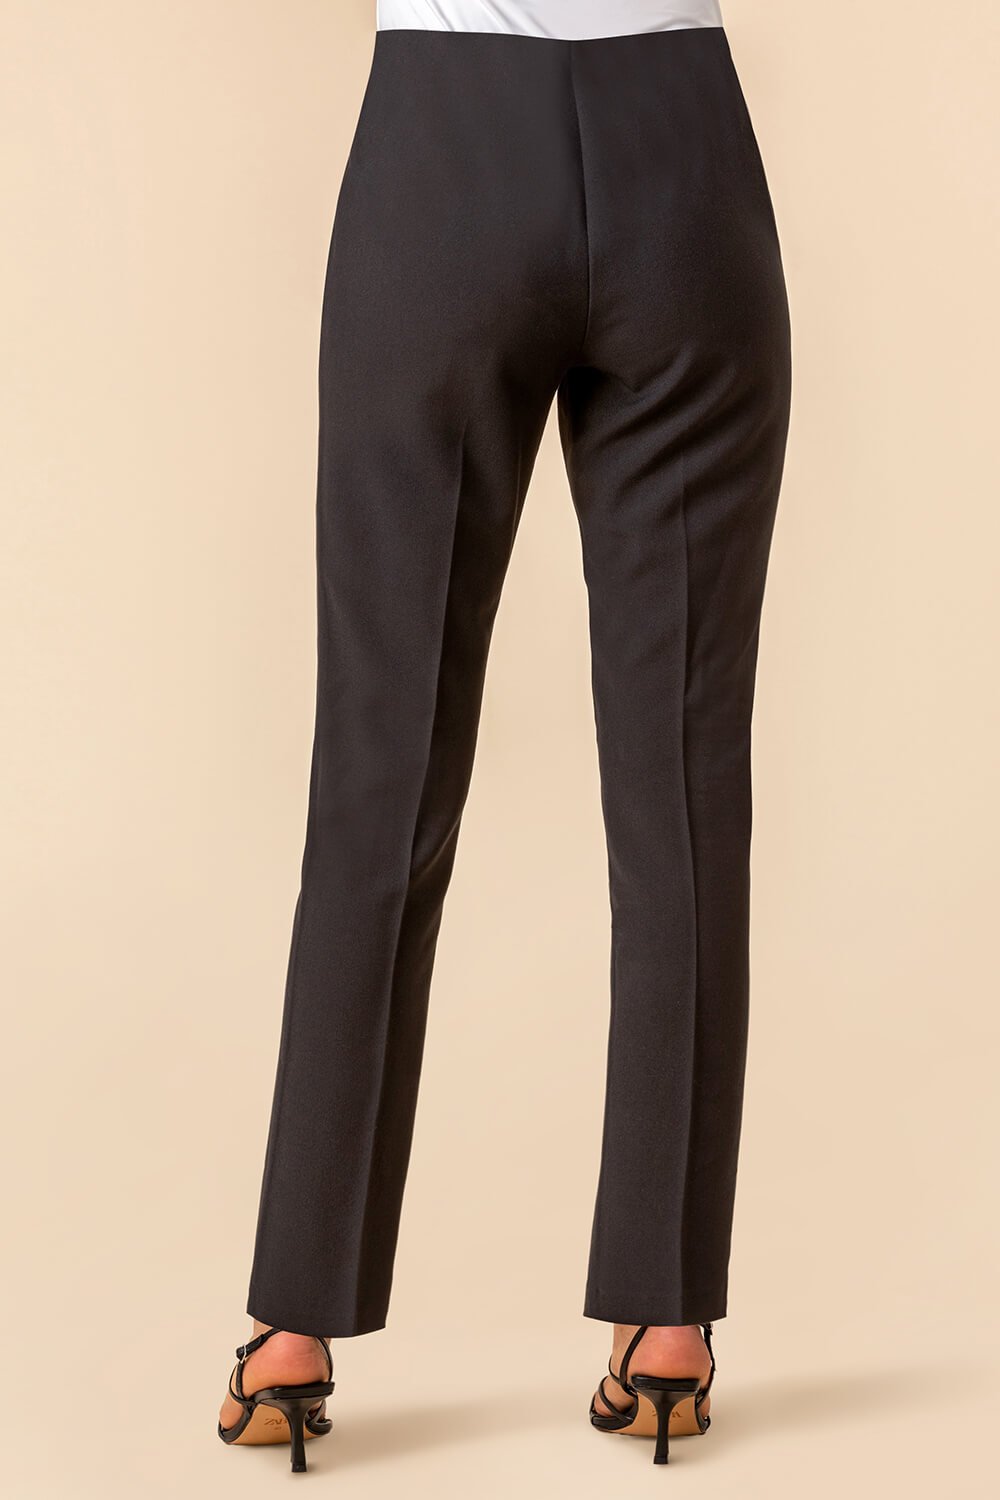 Black Soft Jersey Stretch Seam Detail Trouser, Image 2 of 4